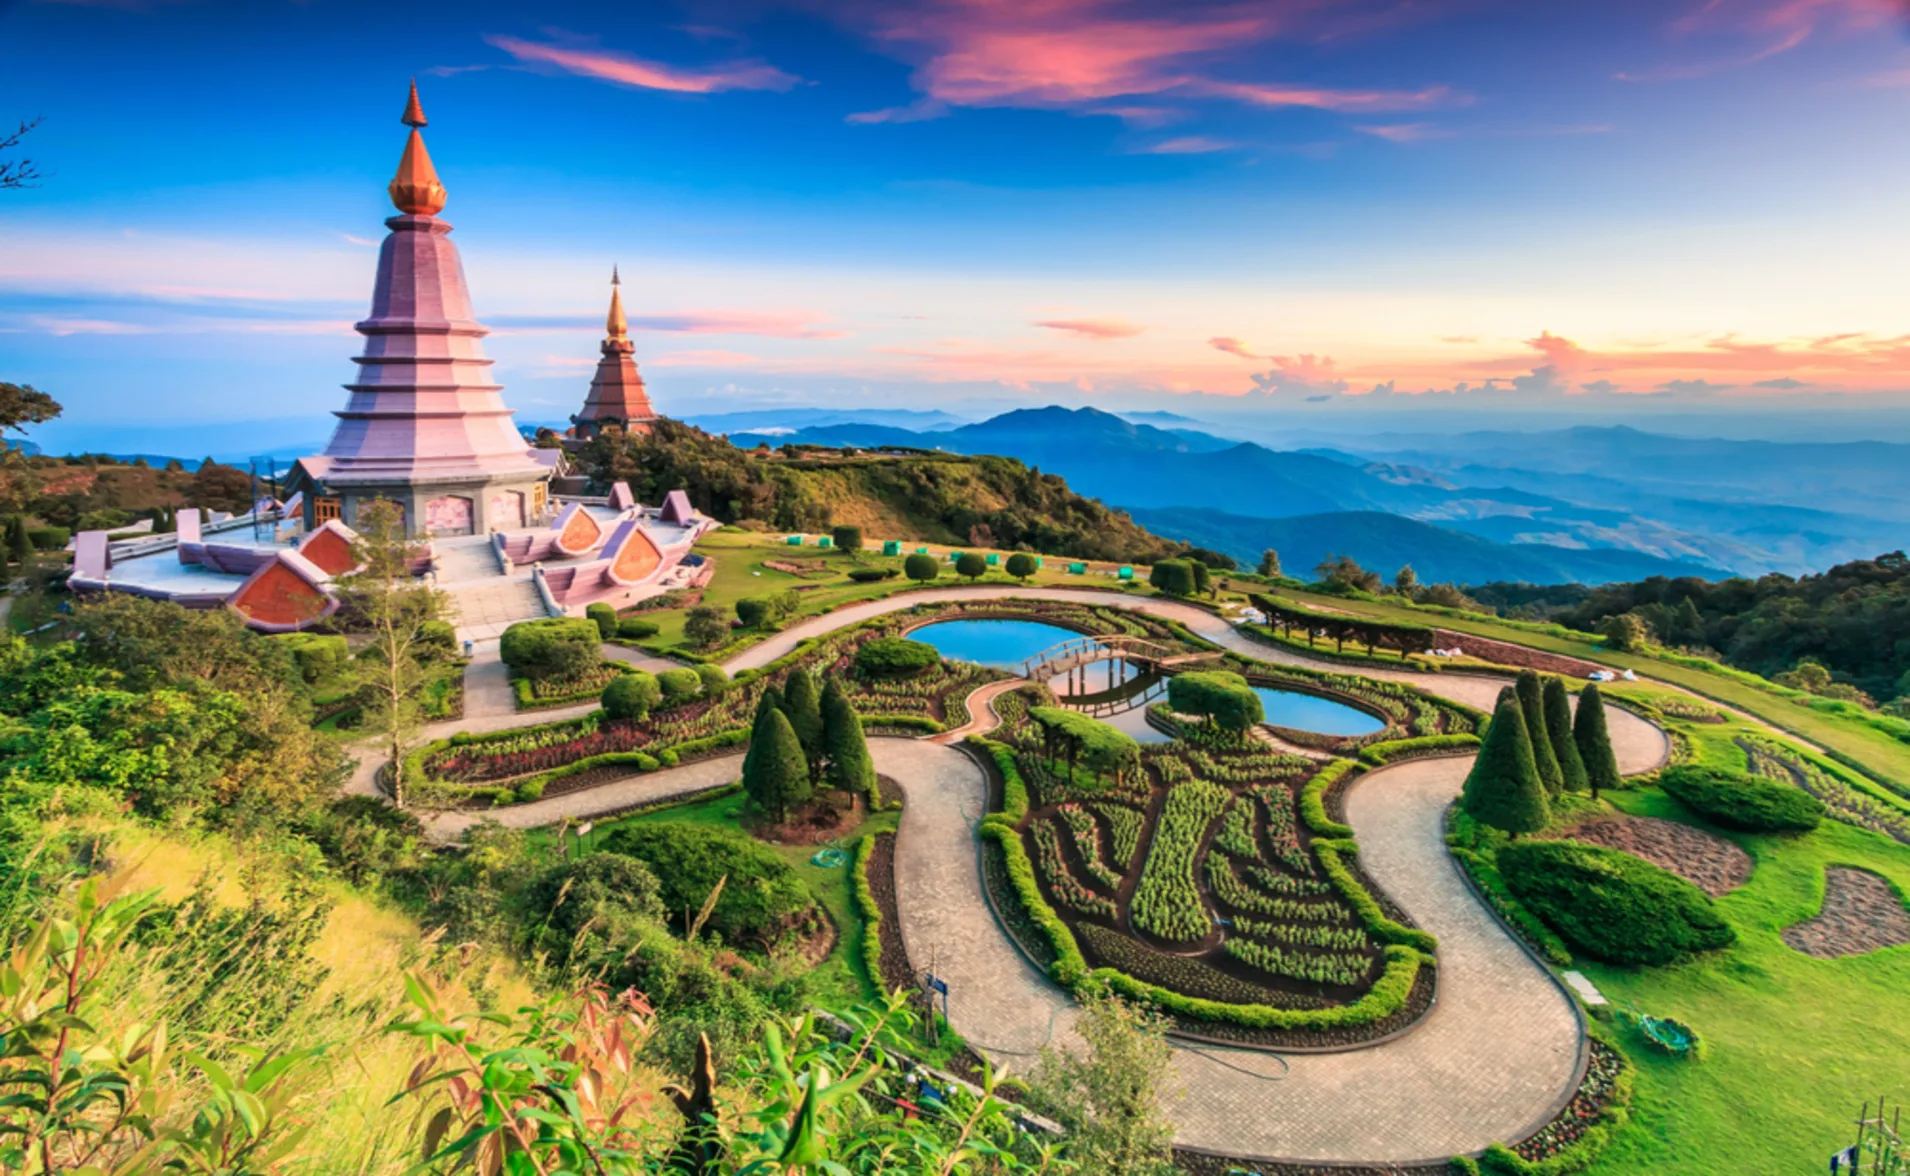 Landscape of Two Pagodas at Sunset in Chiang Mai Thailand